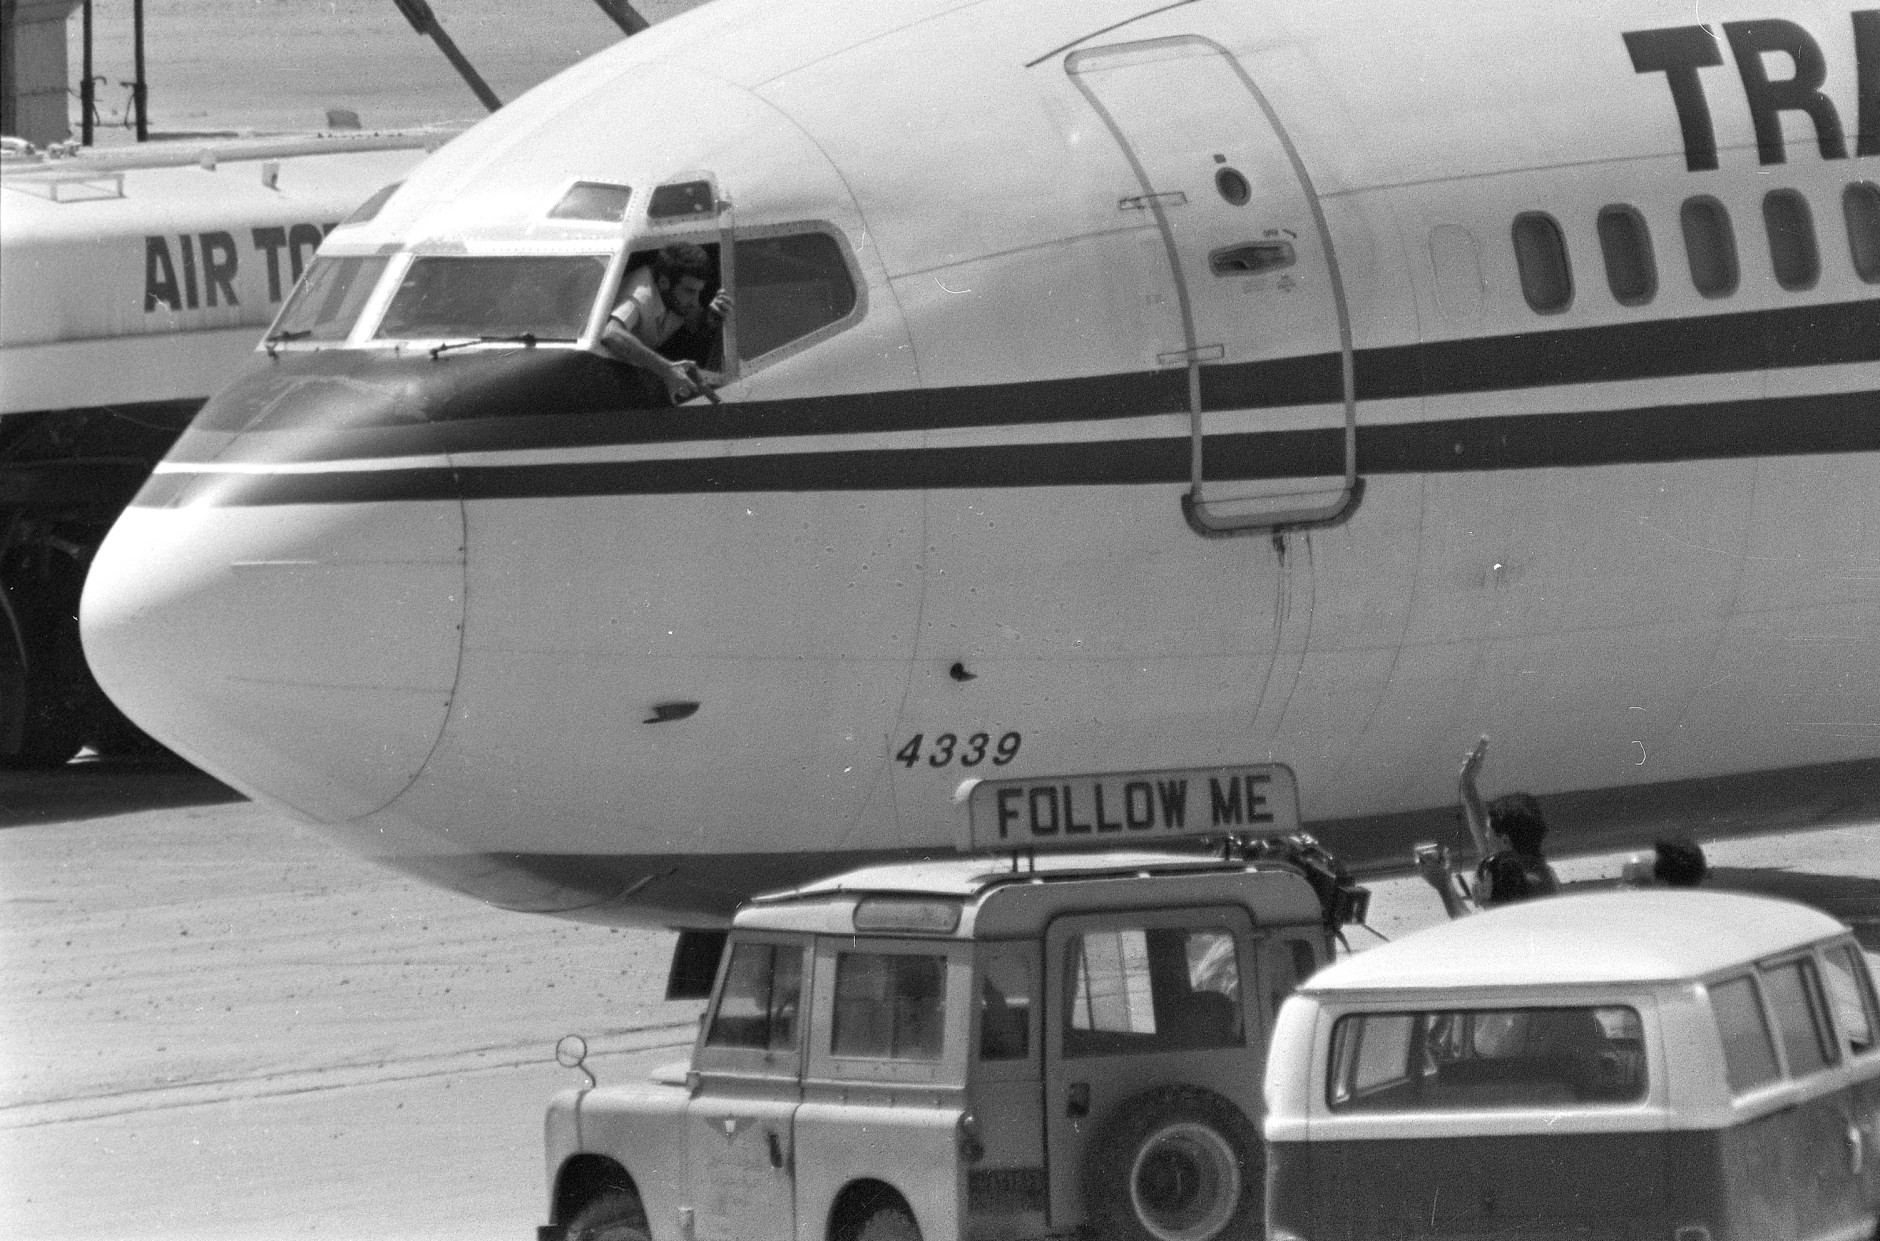 A Shiite Muslim hijacker points his pistol toward an ABC news media crew from the window of the cockpit of the Trans World Airlines jet as the American television crew approaches the jet for an interview at Beirut International Airport, Lebanon, June 19, 1985.  Gunmen hijacked TWA flight 847 carrying 153 people on June 14.  The ordeal lasted 17 days, with one passenger killed.  (AP Photo/Herve Merliac)